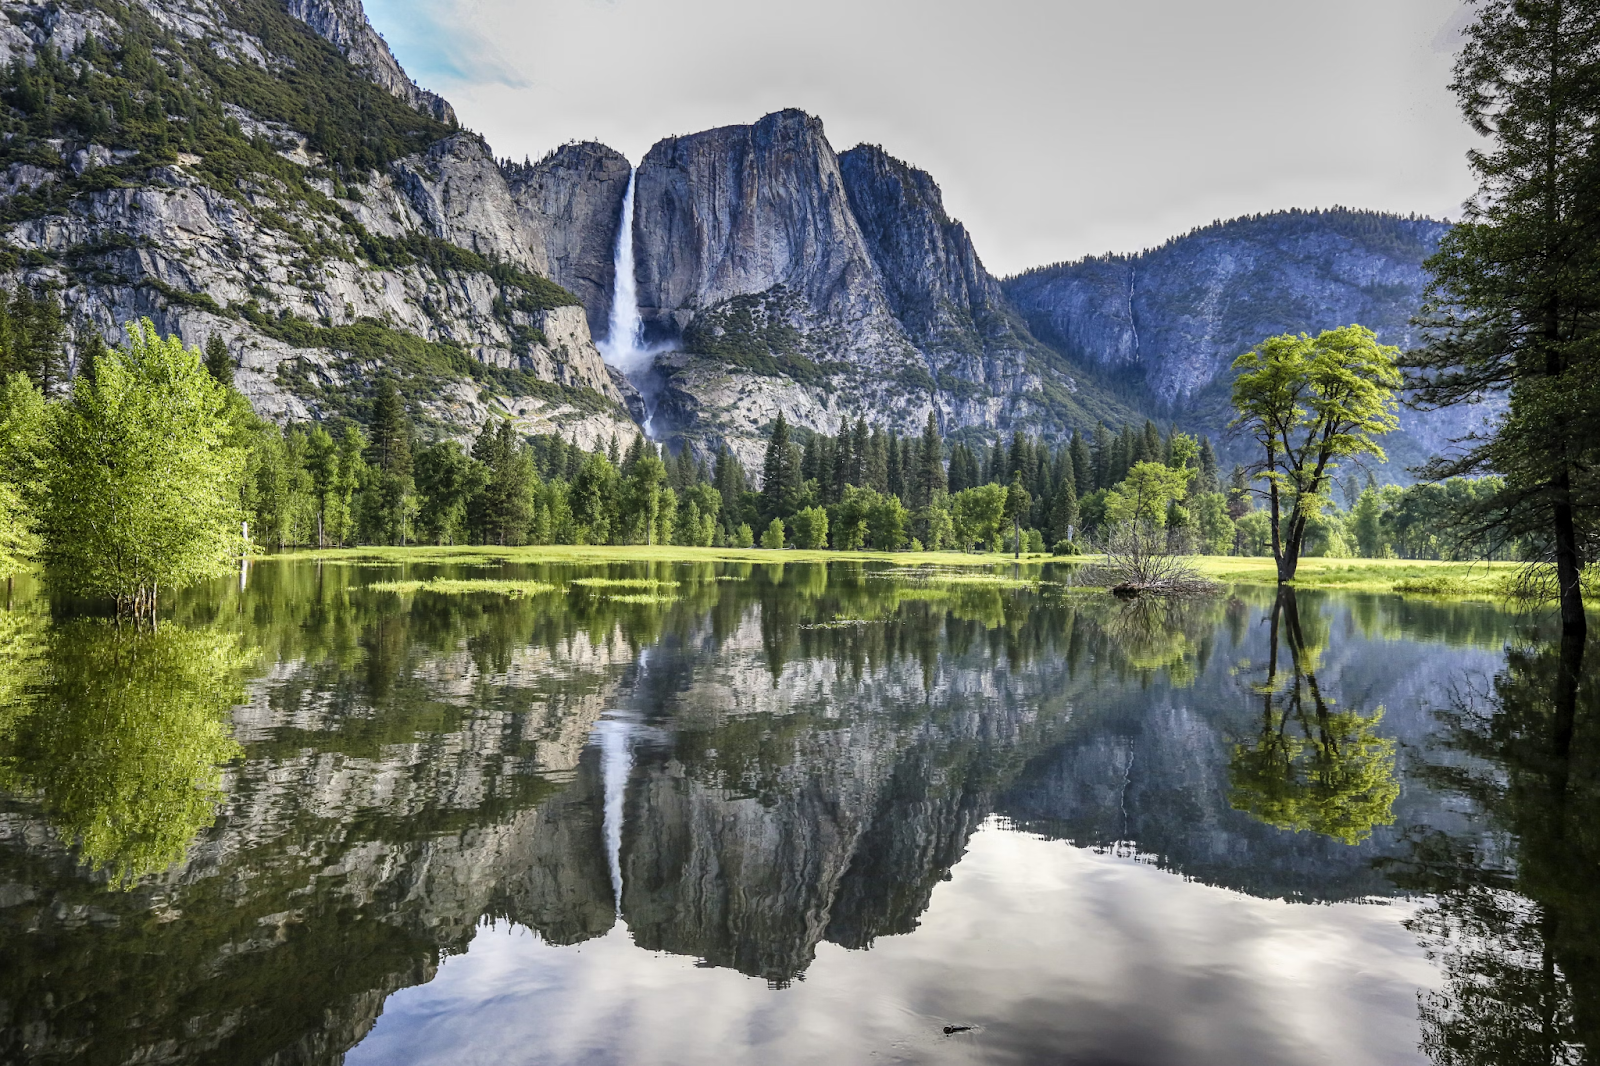 A stunning reflection of Yosemite Valley's lush greenery and towering trees in the calm, flooded waters under a clear, expansive sky.